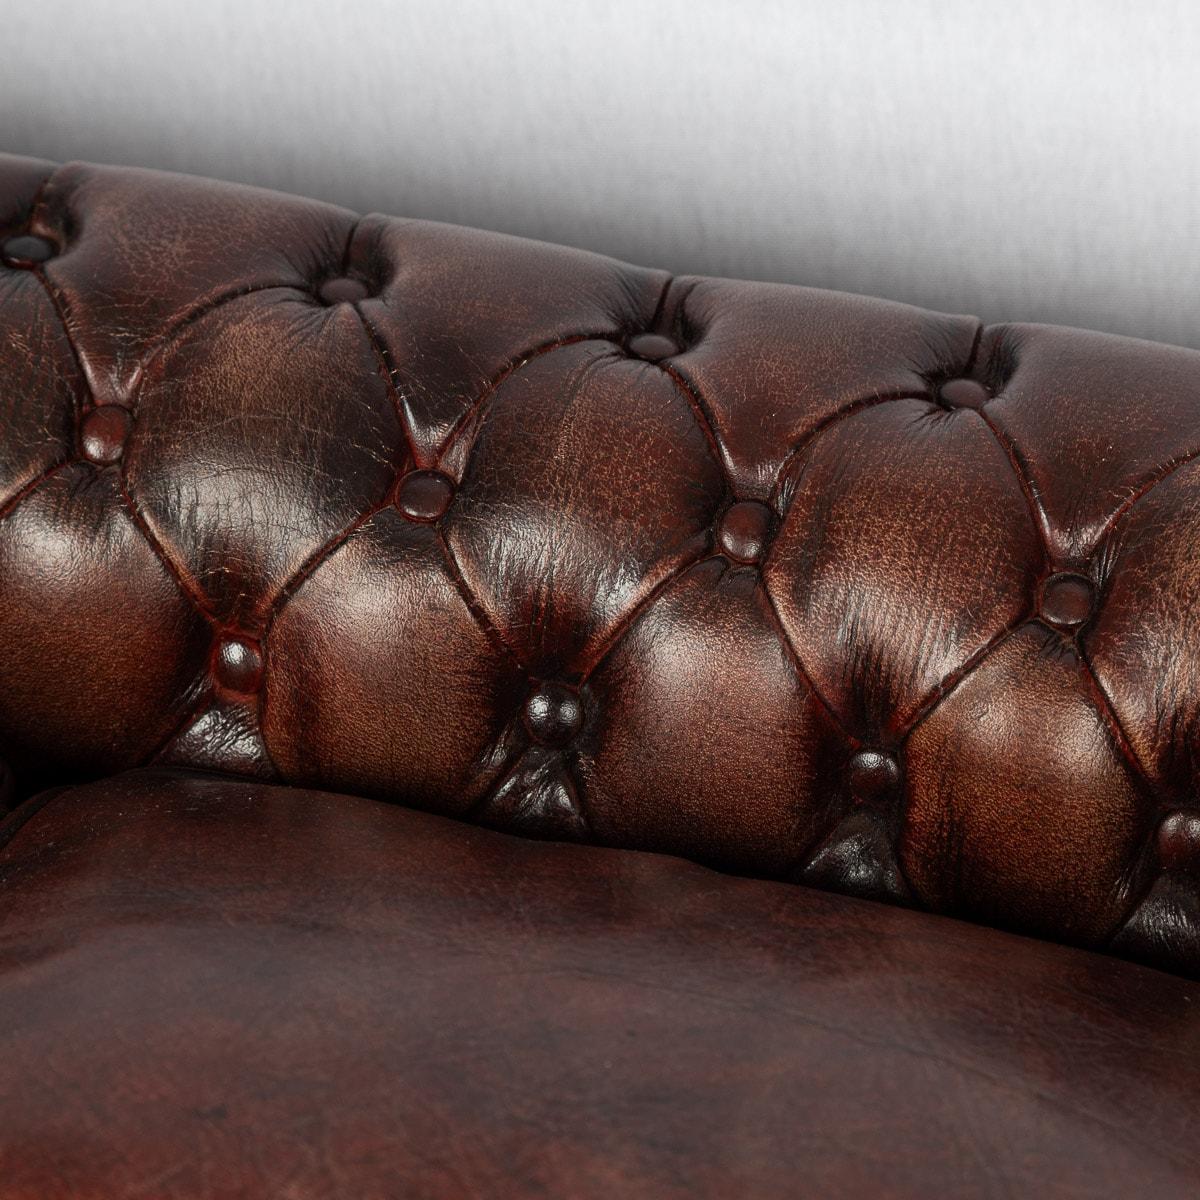 20th Century English Chesterfield Miniature Leather Sofa With Cushion Seats For Sale 10